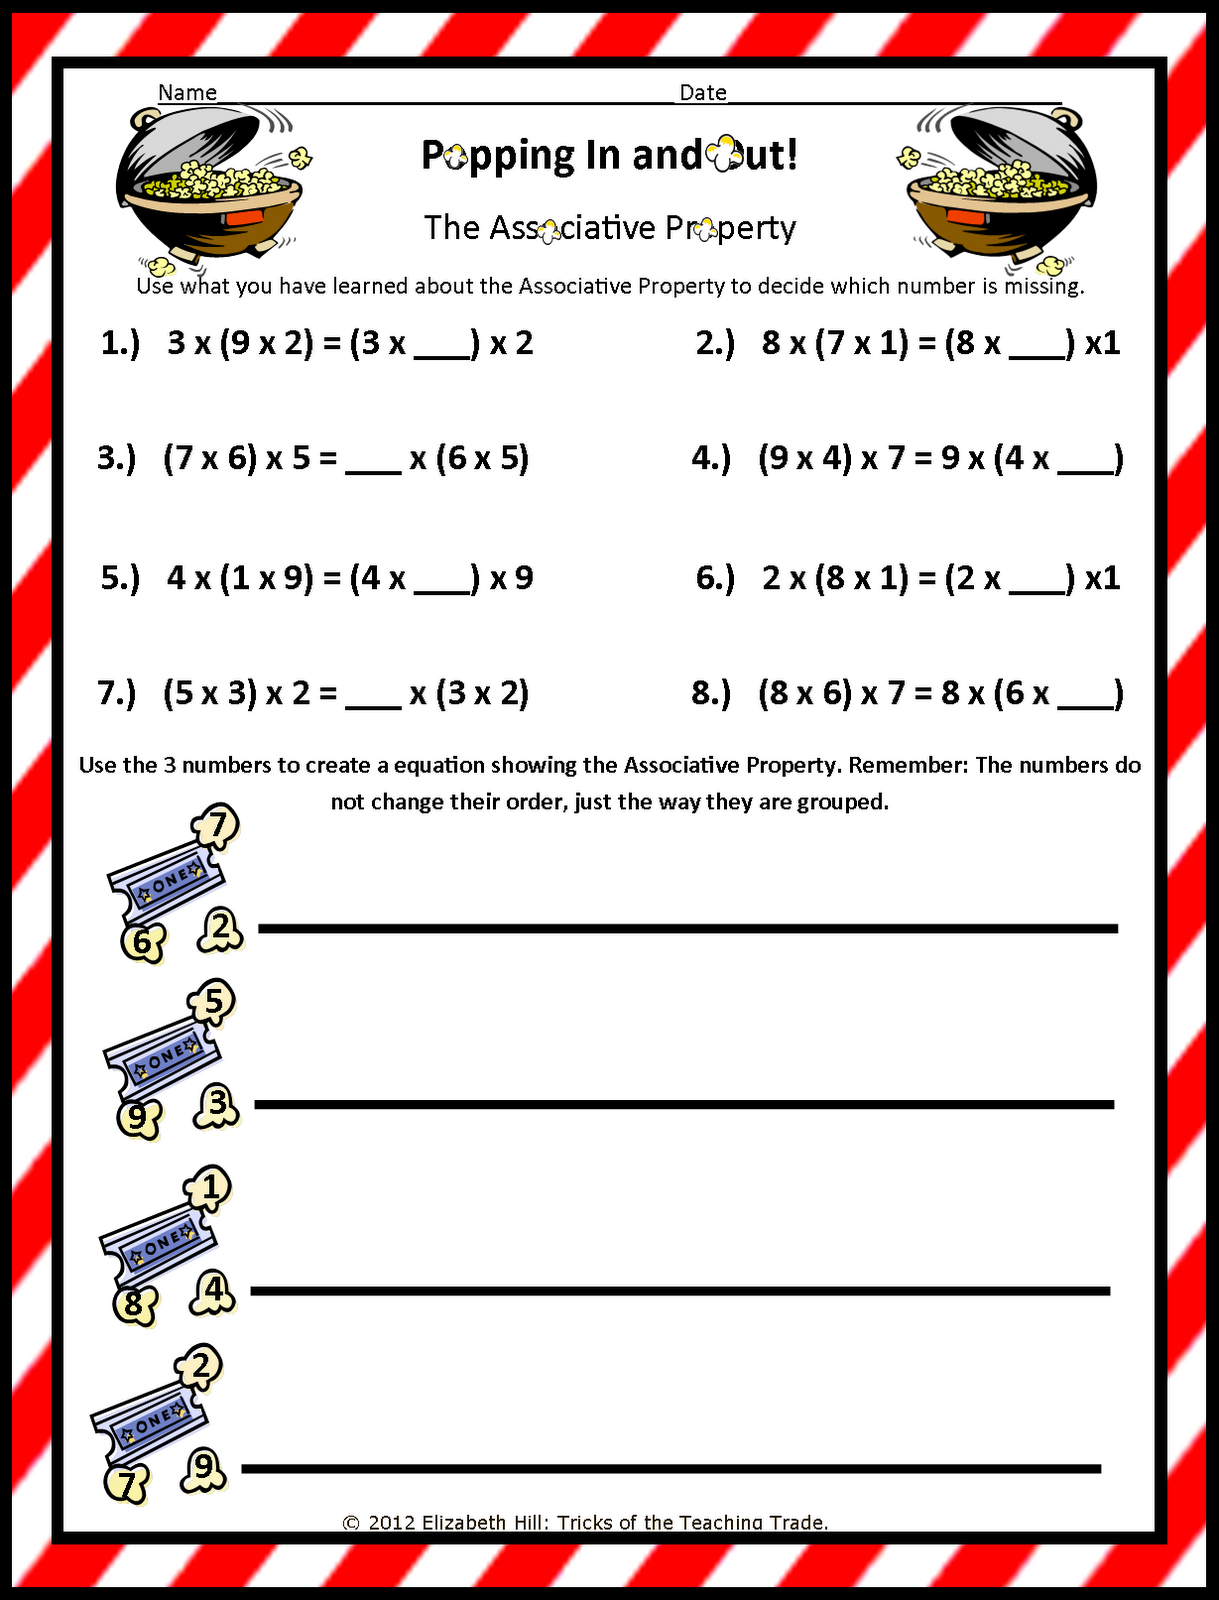 Mrs. Hill's Perfect P.I.R.A.T.E.S.: The Properties of Multiplication